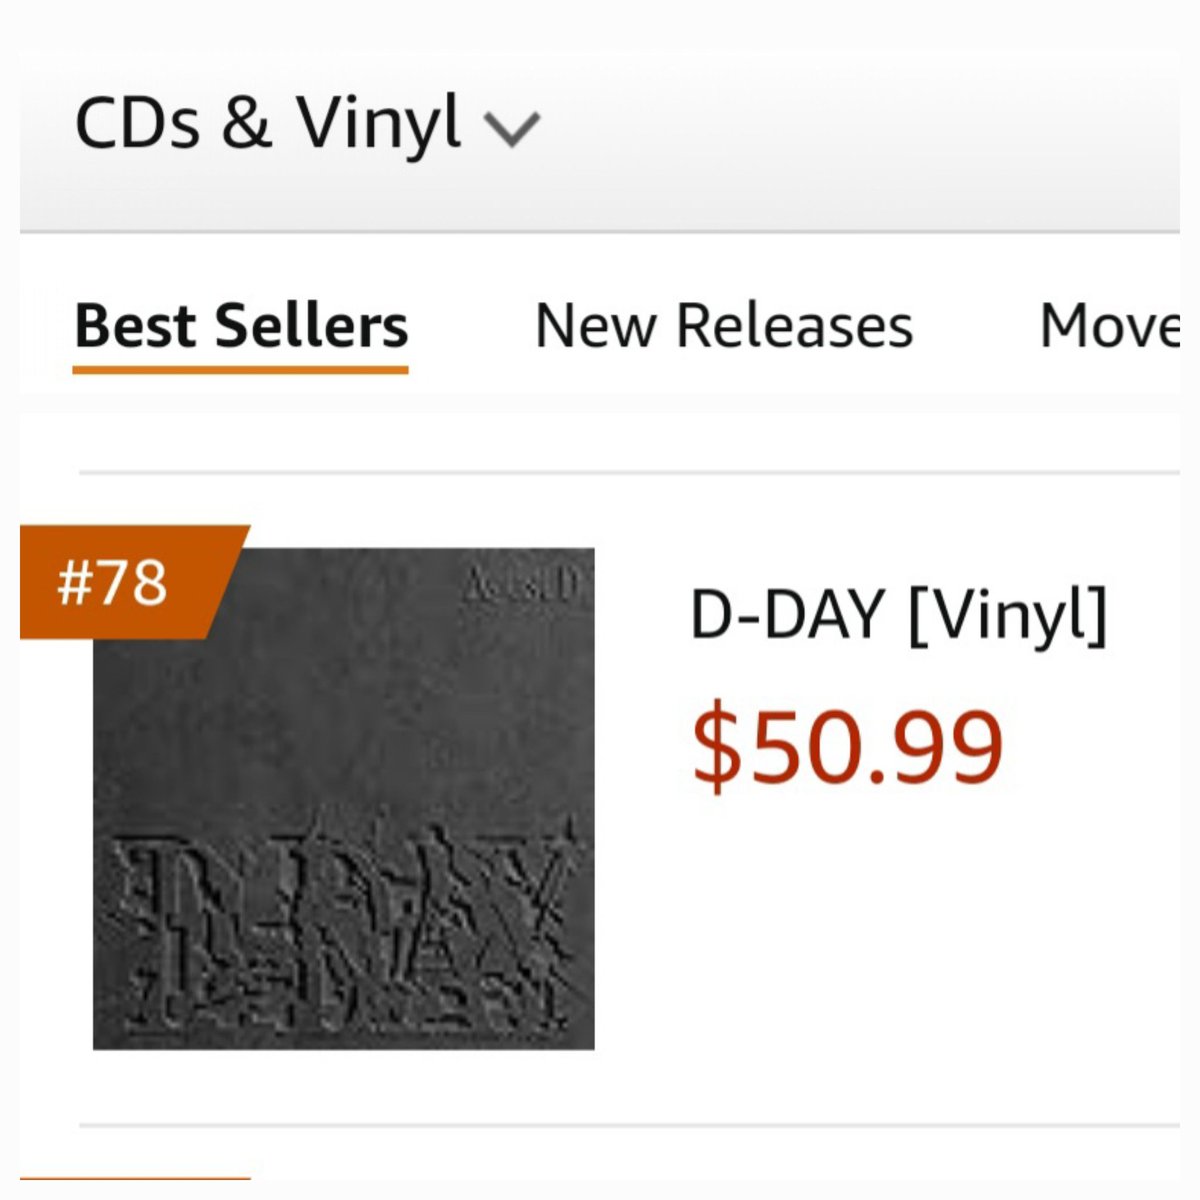 D-DAY Vinyl is currently #78 on US Amazon's CDs & Vinyl Best Sellers! Let's take it to #1! 🔥 BUY D-DAY VINYL WE LOVE YOU YOONGI OUR LOTUS FLOWER MIN YOONGI